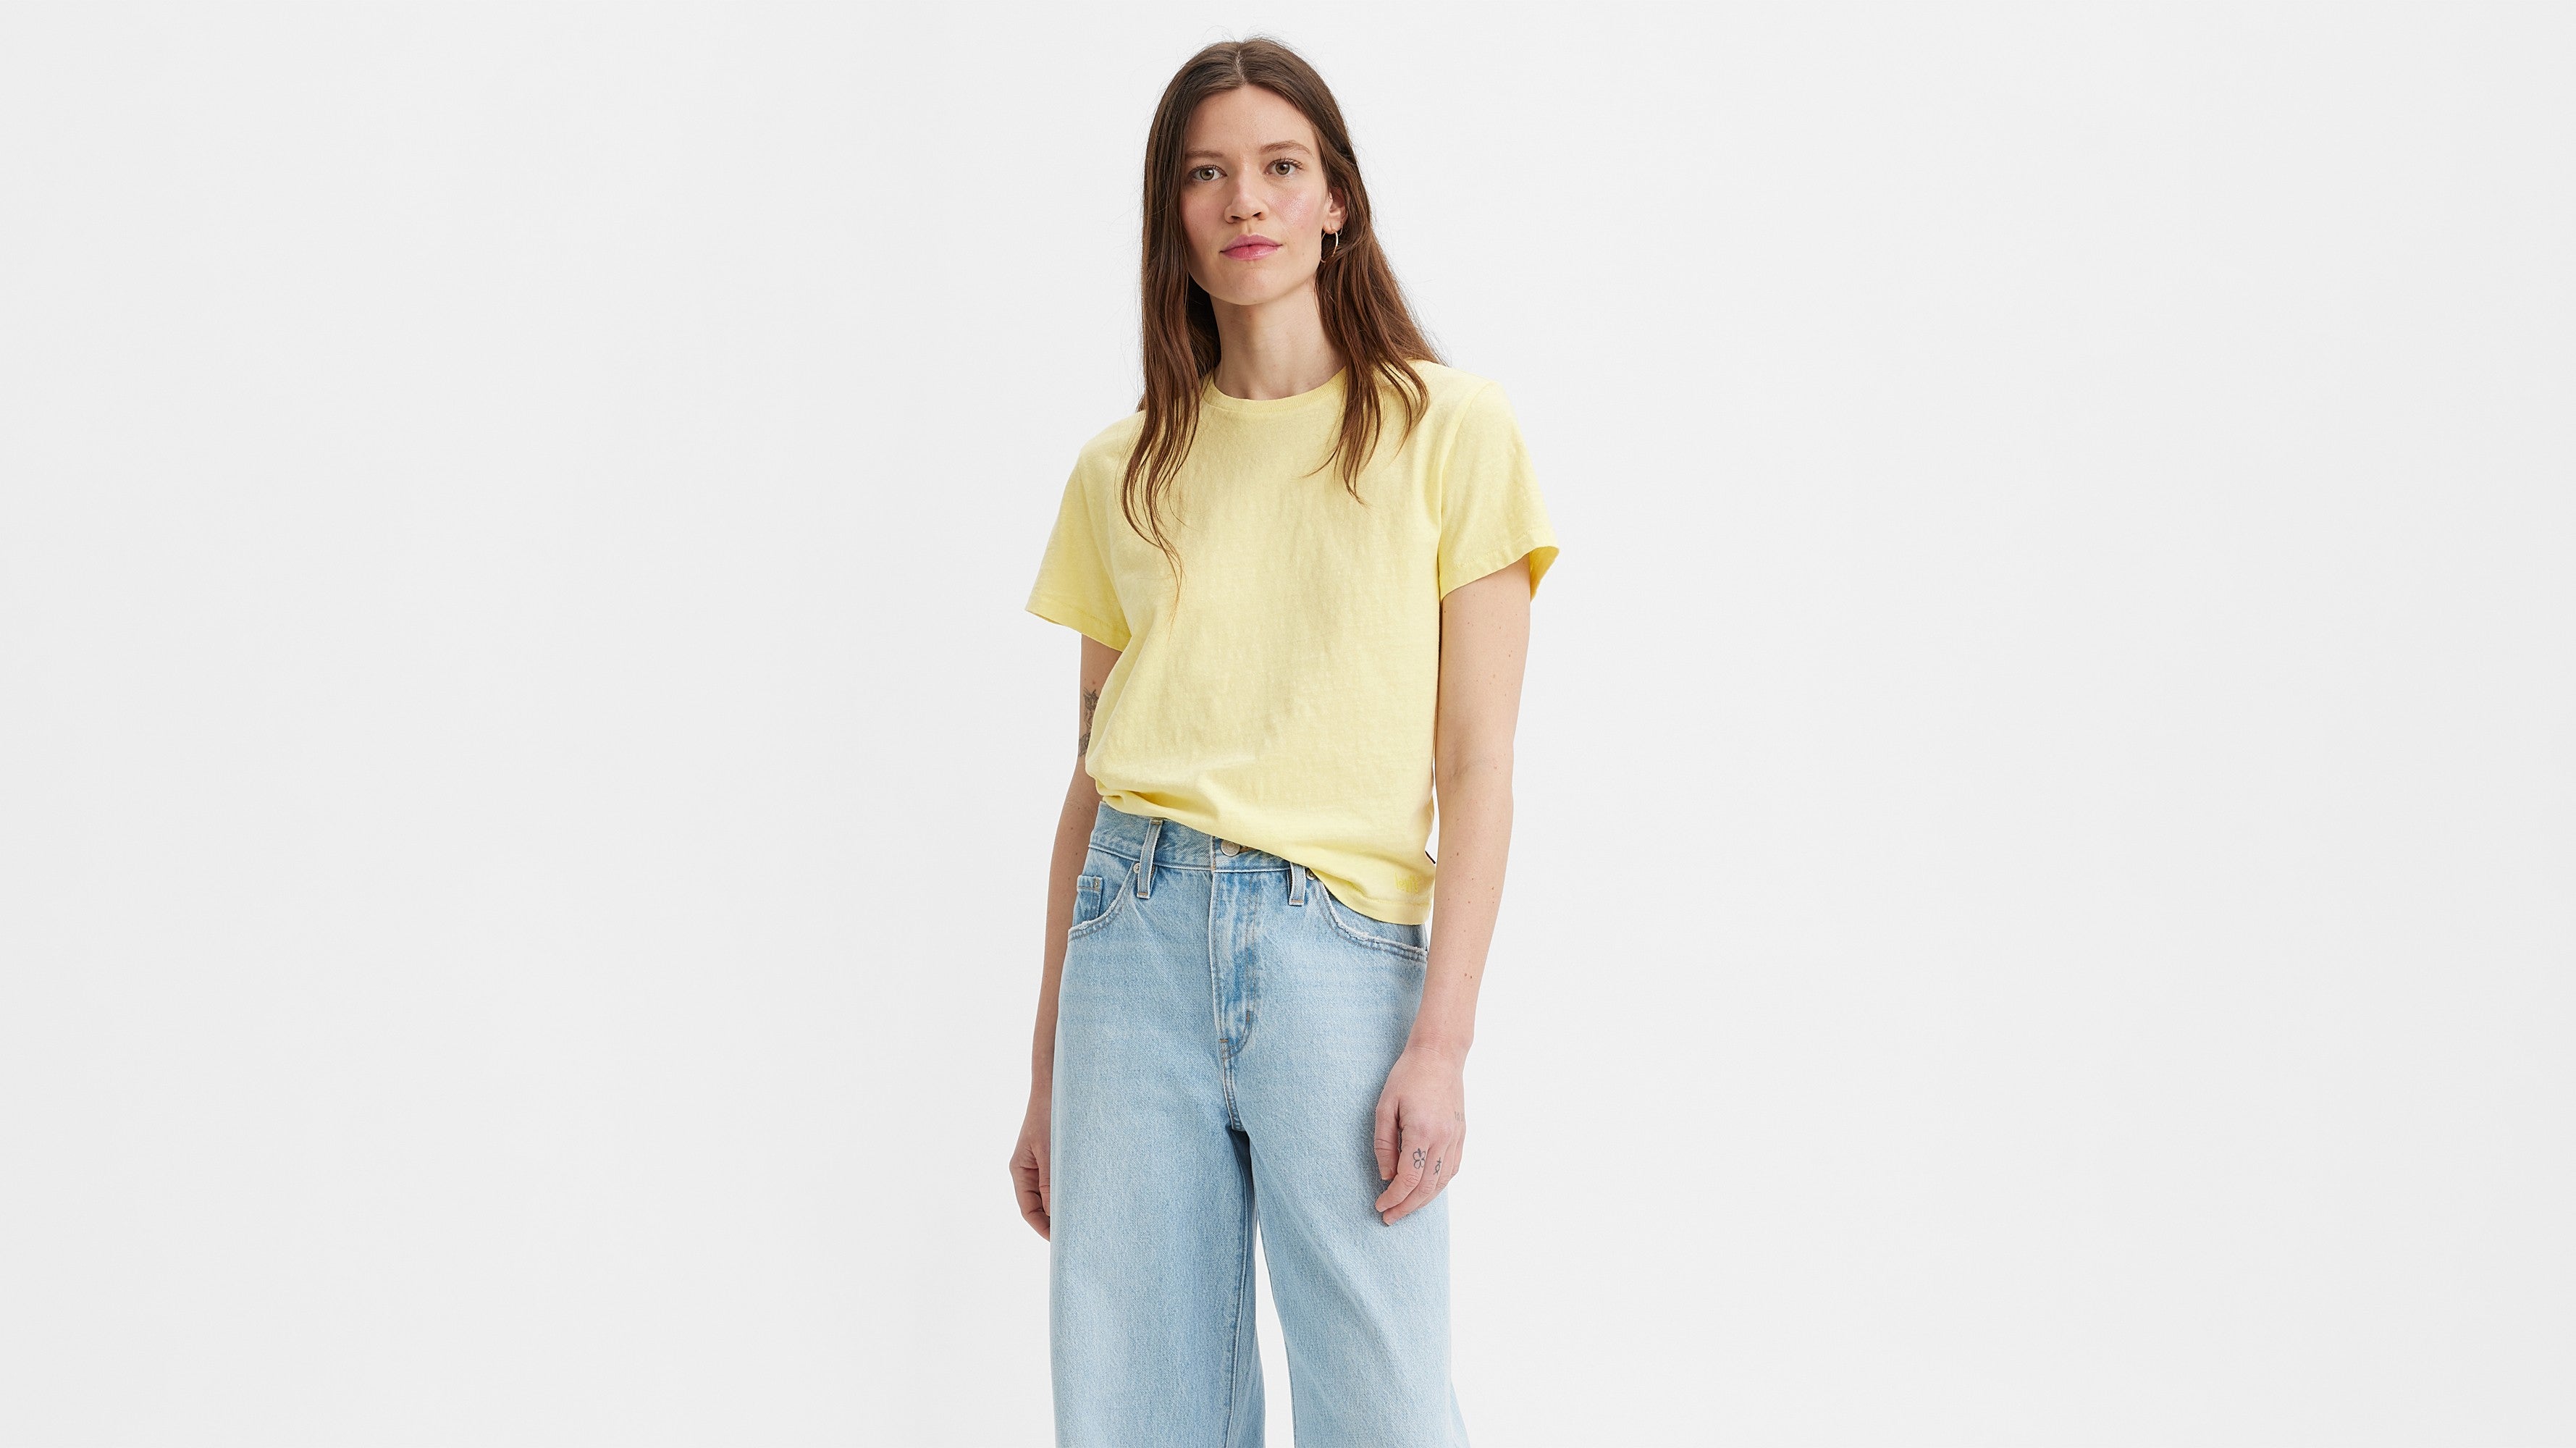 Classic T-Shirts to Wear With Jeans